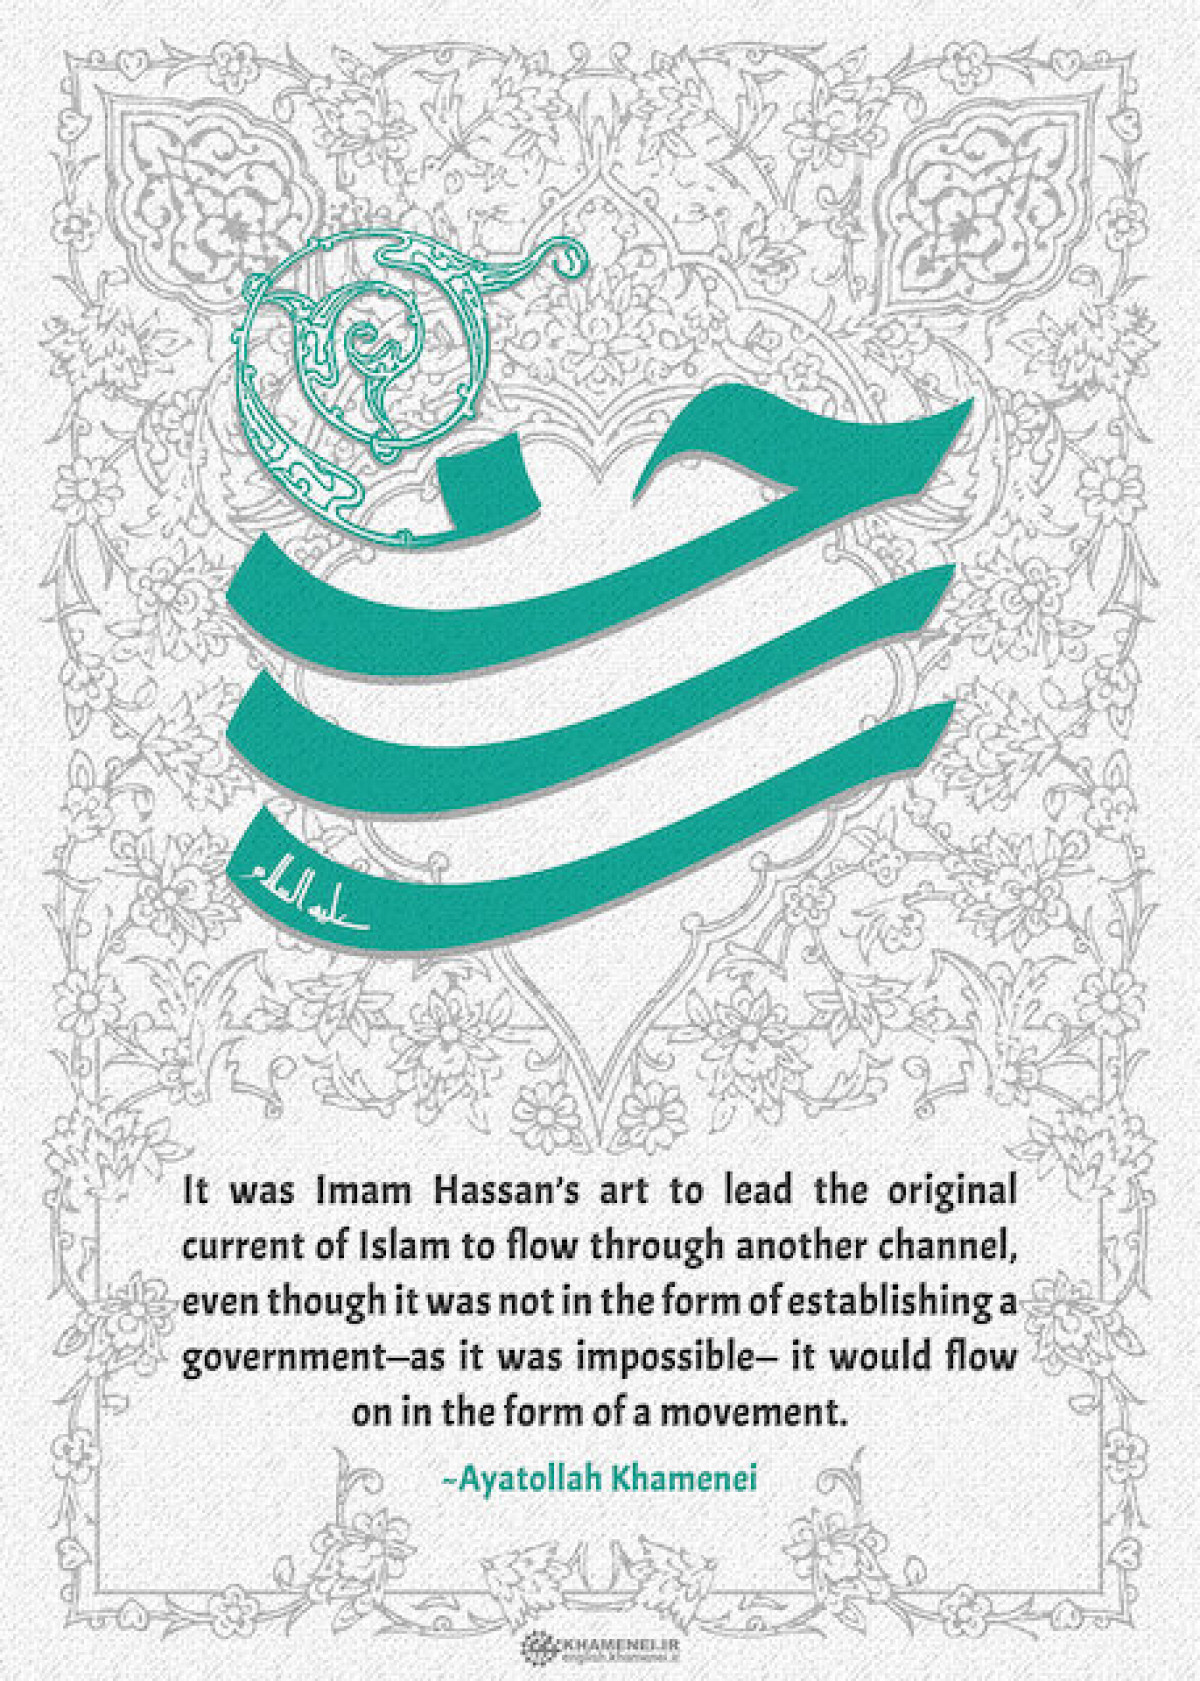 Imam Hassan's (a.s.) art was to lead original Islam to flow in the form of a movement